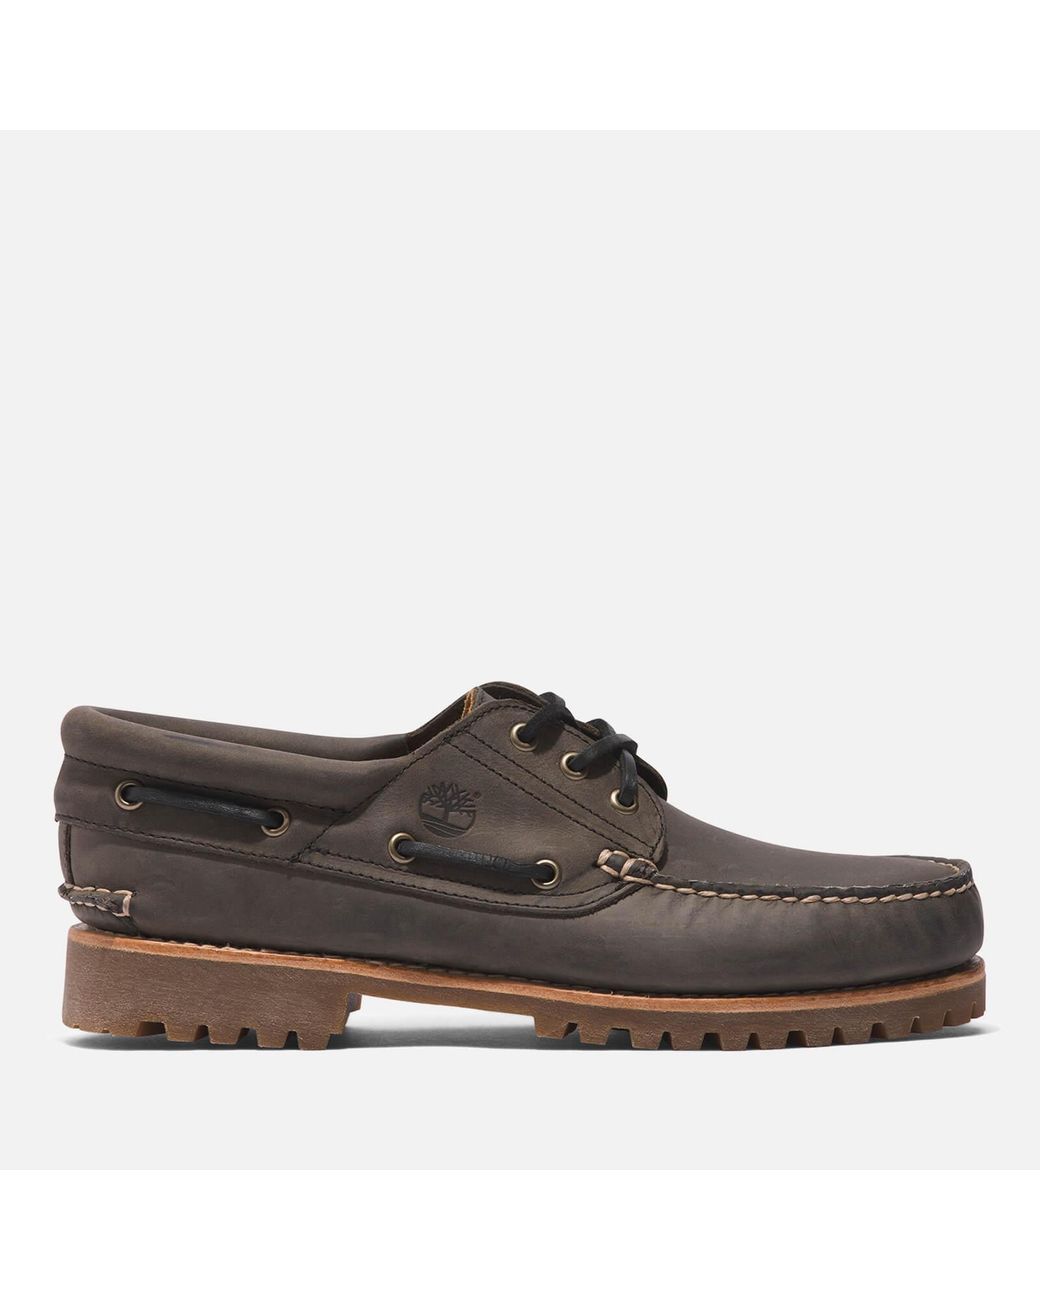 Timberland 3-eye Lug Handsewn Boat Shoe in Brown for Men | Lyst Canada